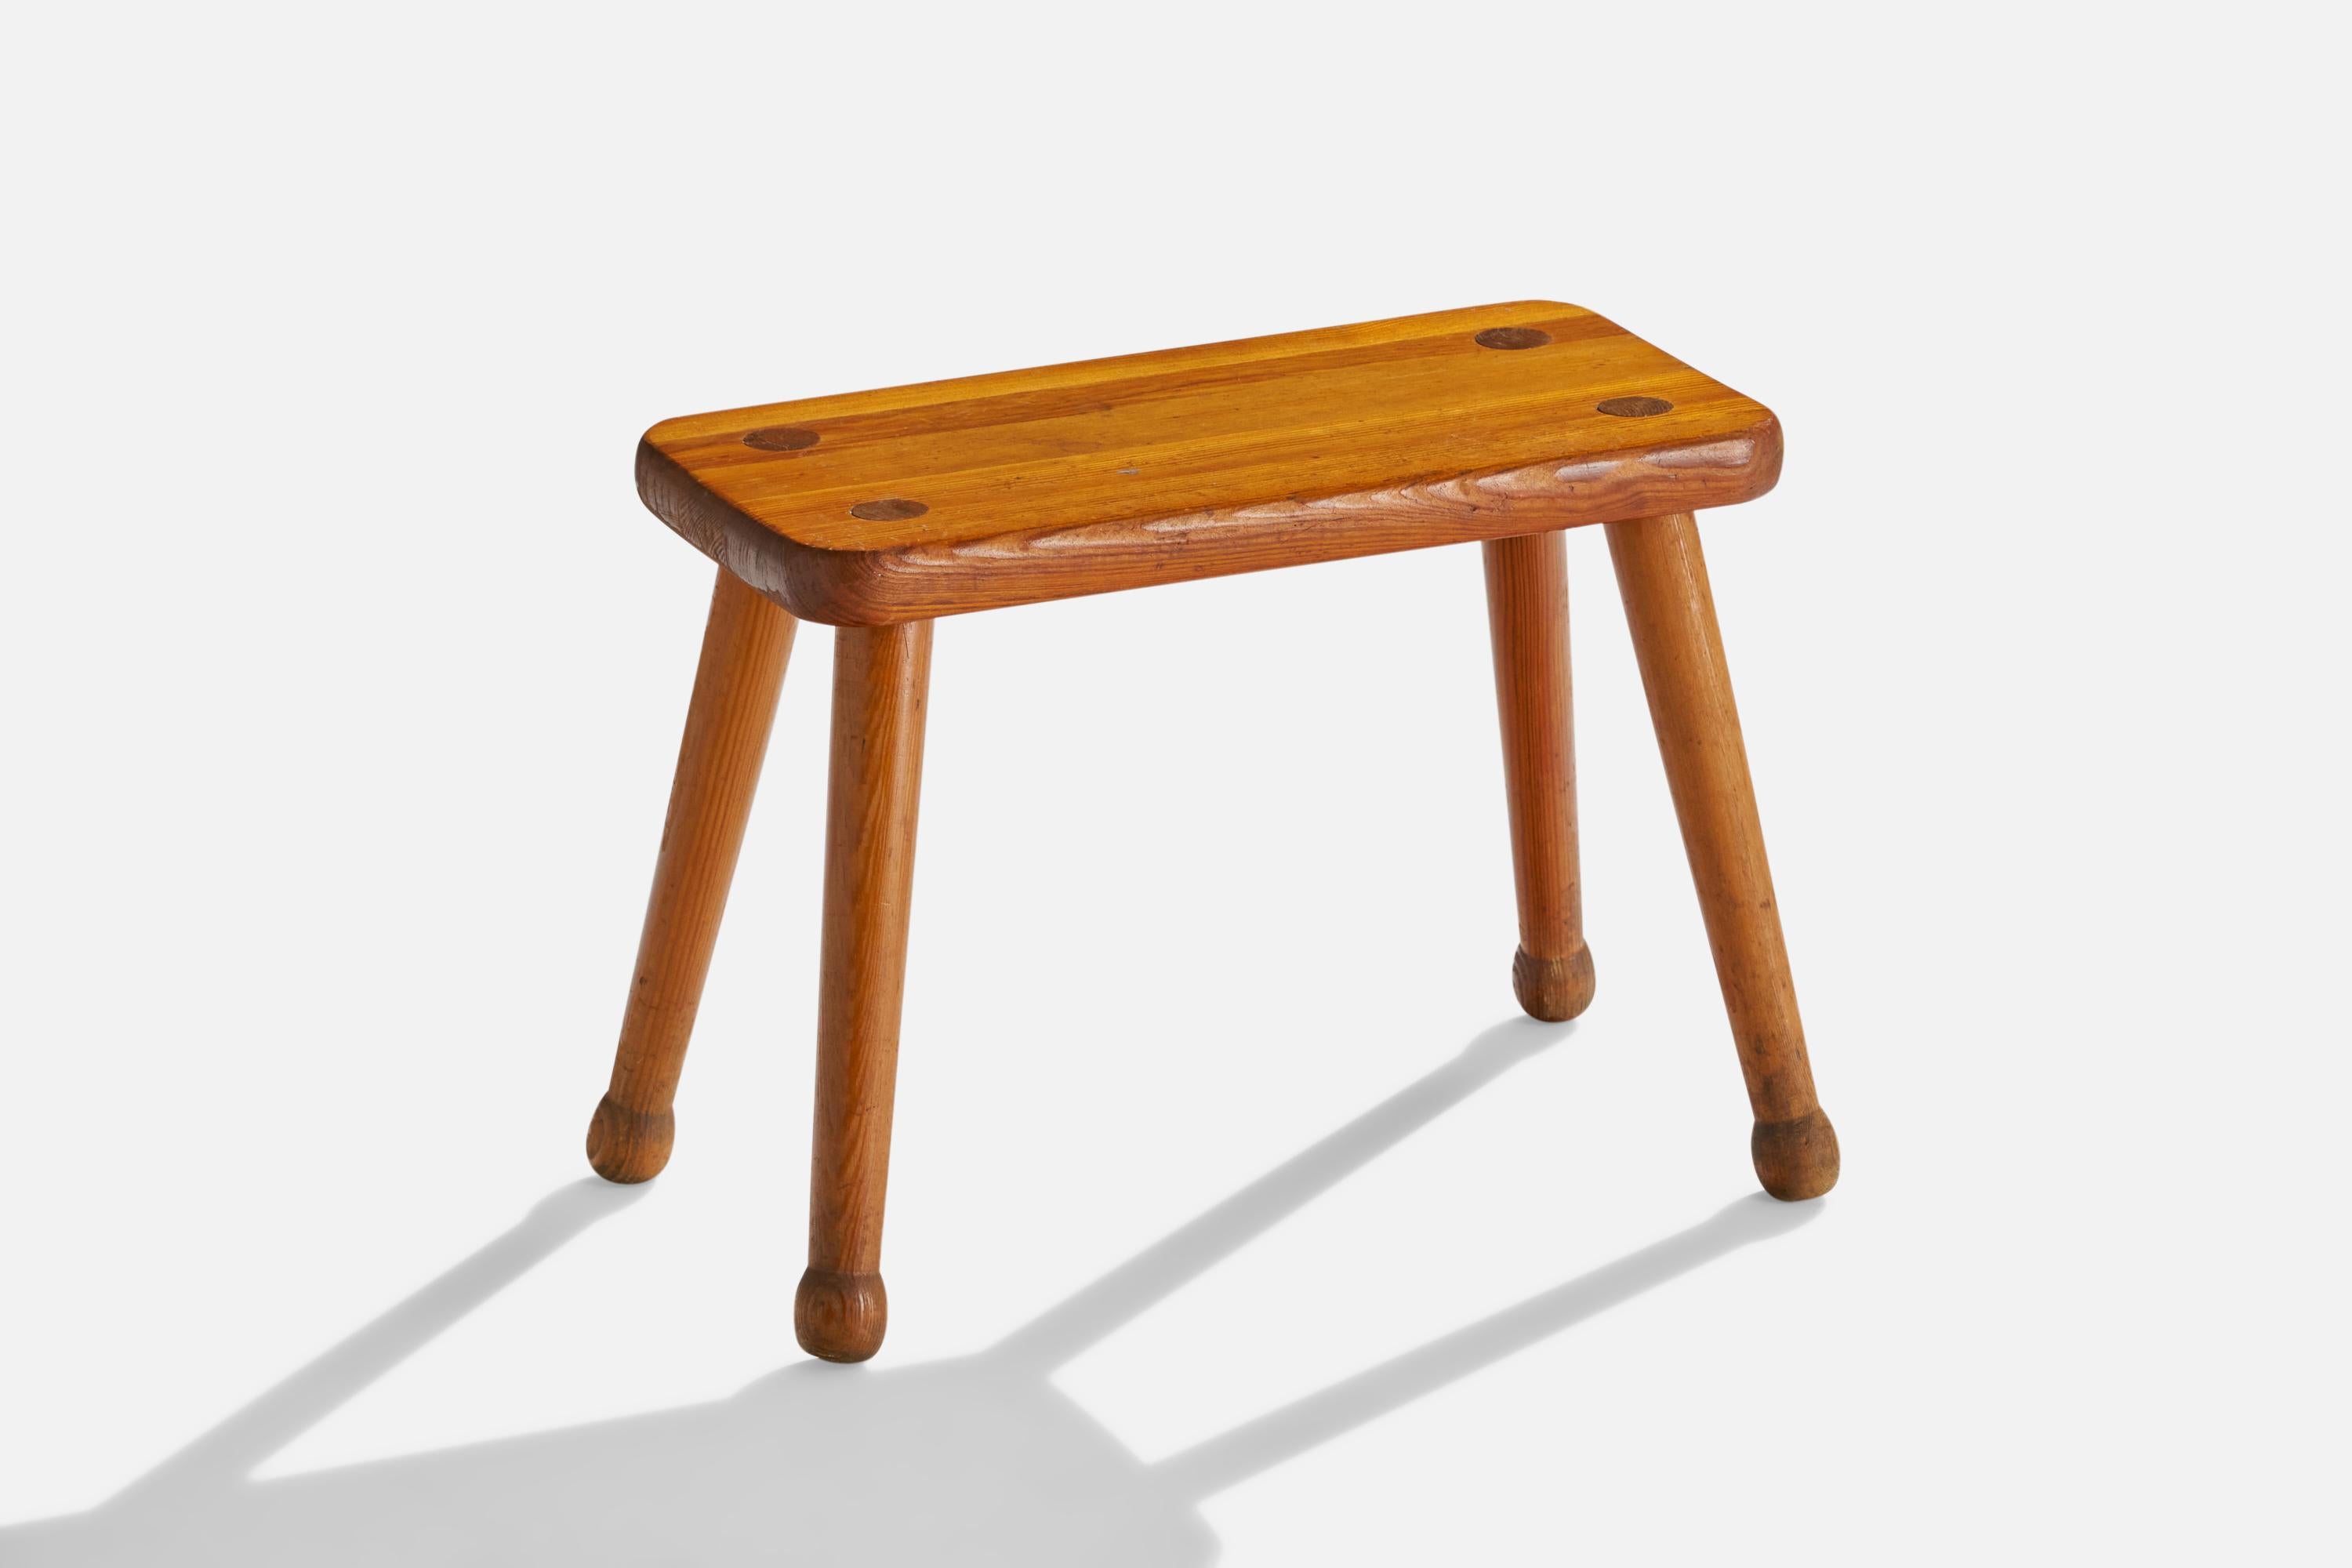 A pine stool designed and produced in Sweden, 1940s.

seat height: 13.4